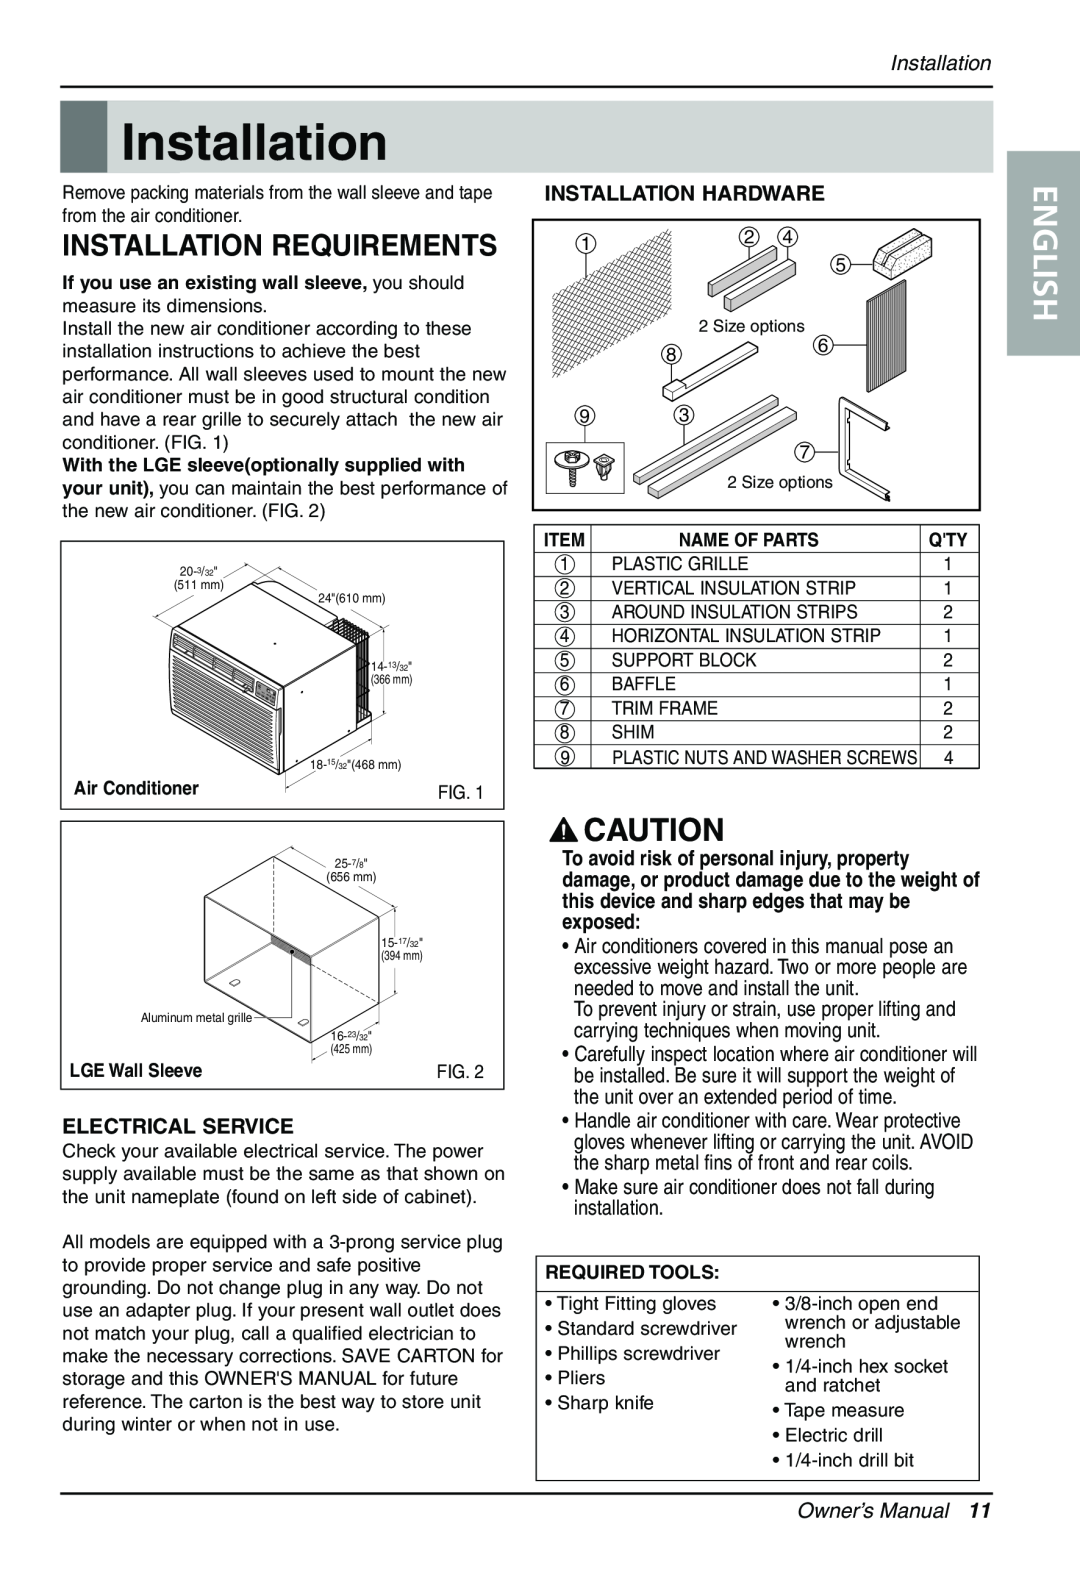 Sears LT143CNR, LT123CNR Installation Requirements, English, Electrical Service, Installation Hardware, Owner’s Manual 